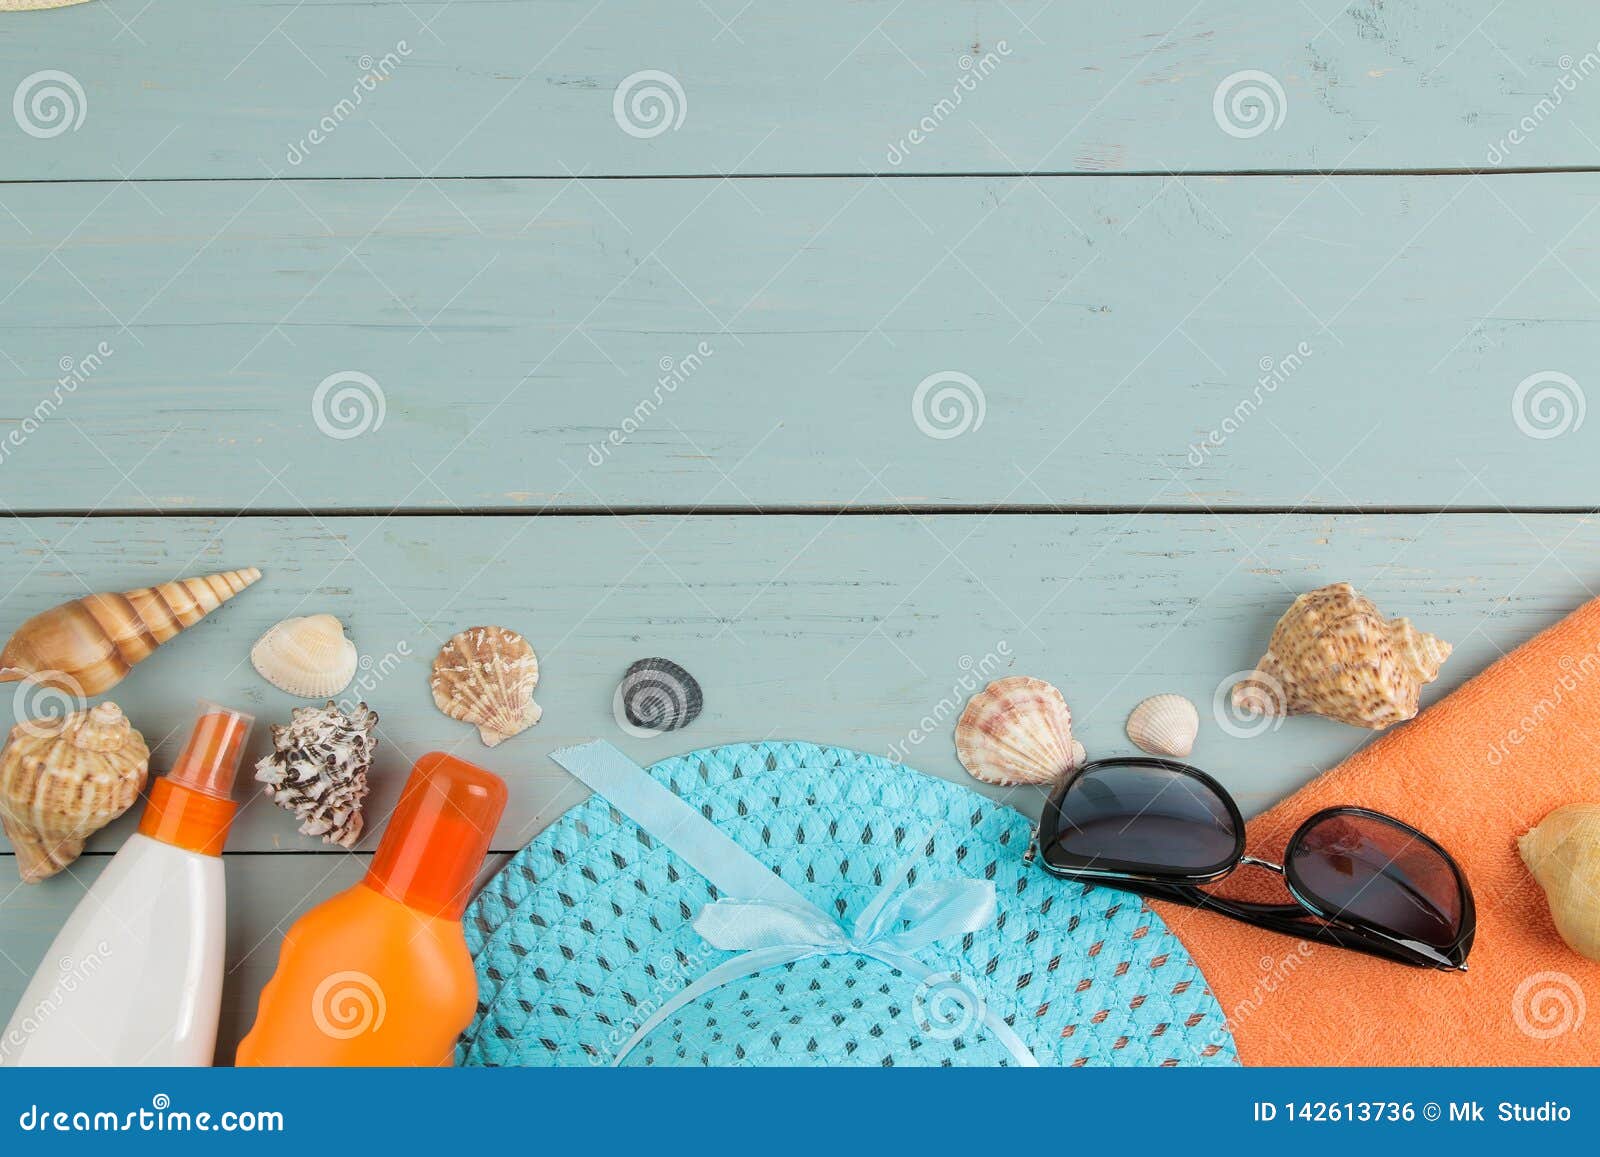 Summer Accessories. Beach Accessories. Sunscreens, a Hat, Shells, and ...